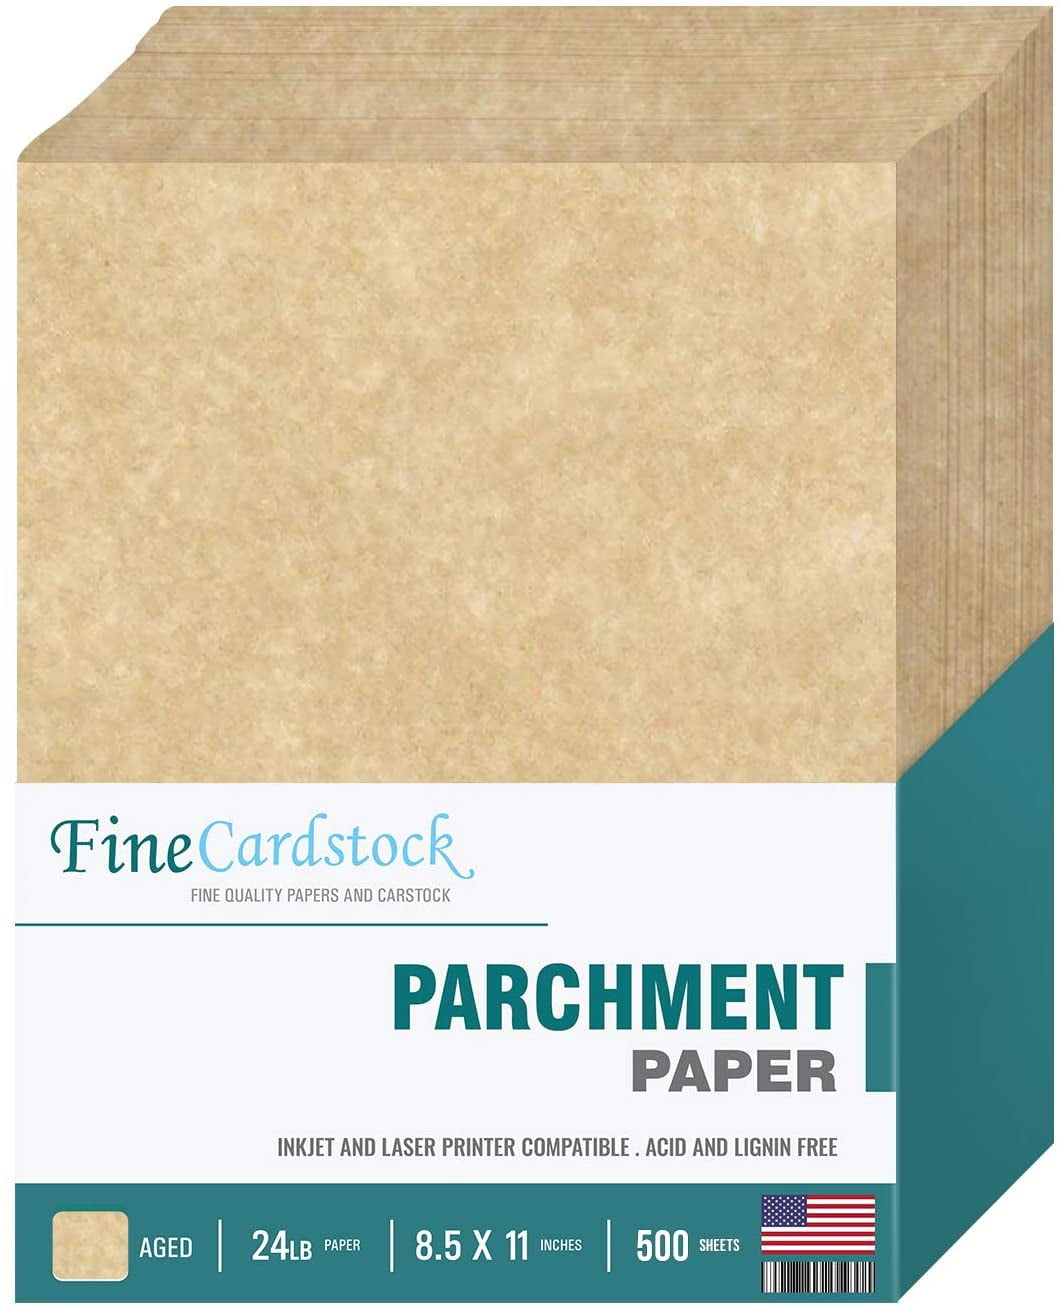 Parchment Paper Text 24lb Size 8.5 x 11 Inches 500 Sheets per Pack (Aged)